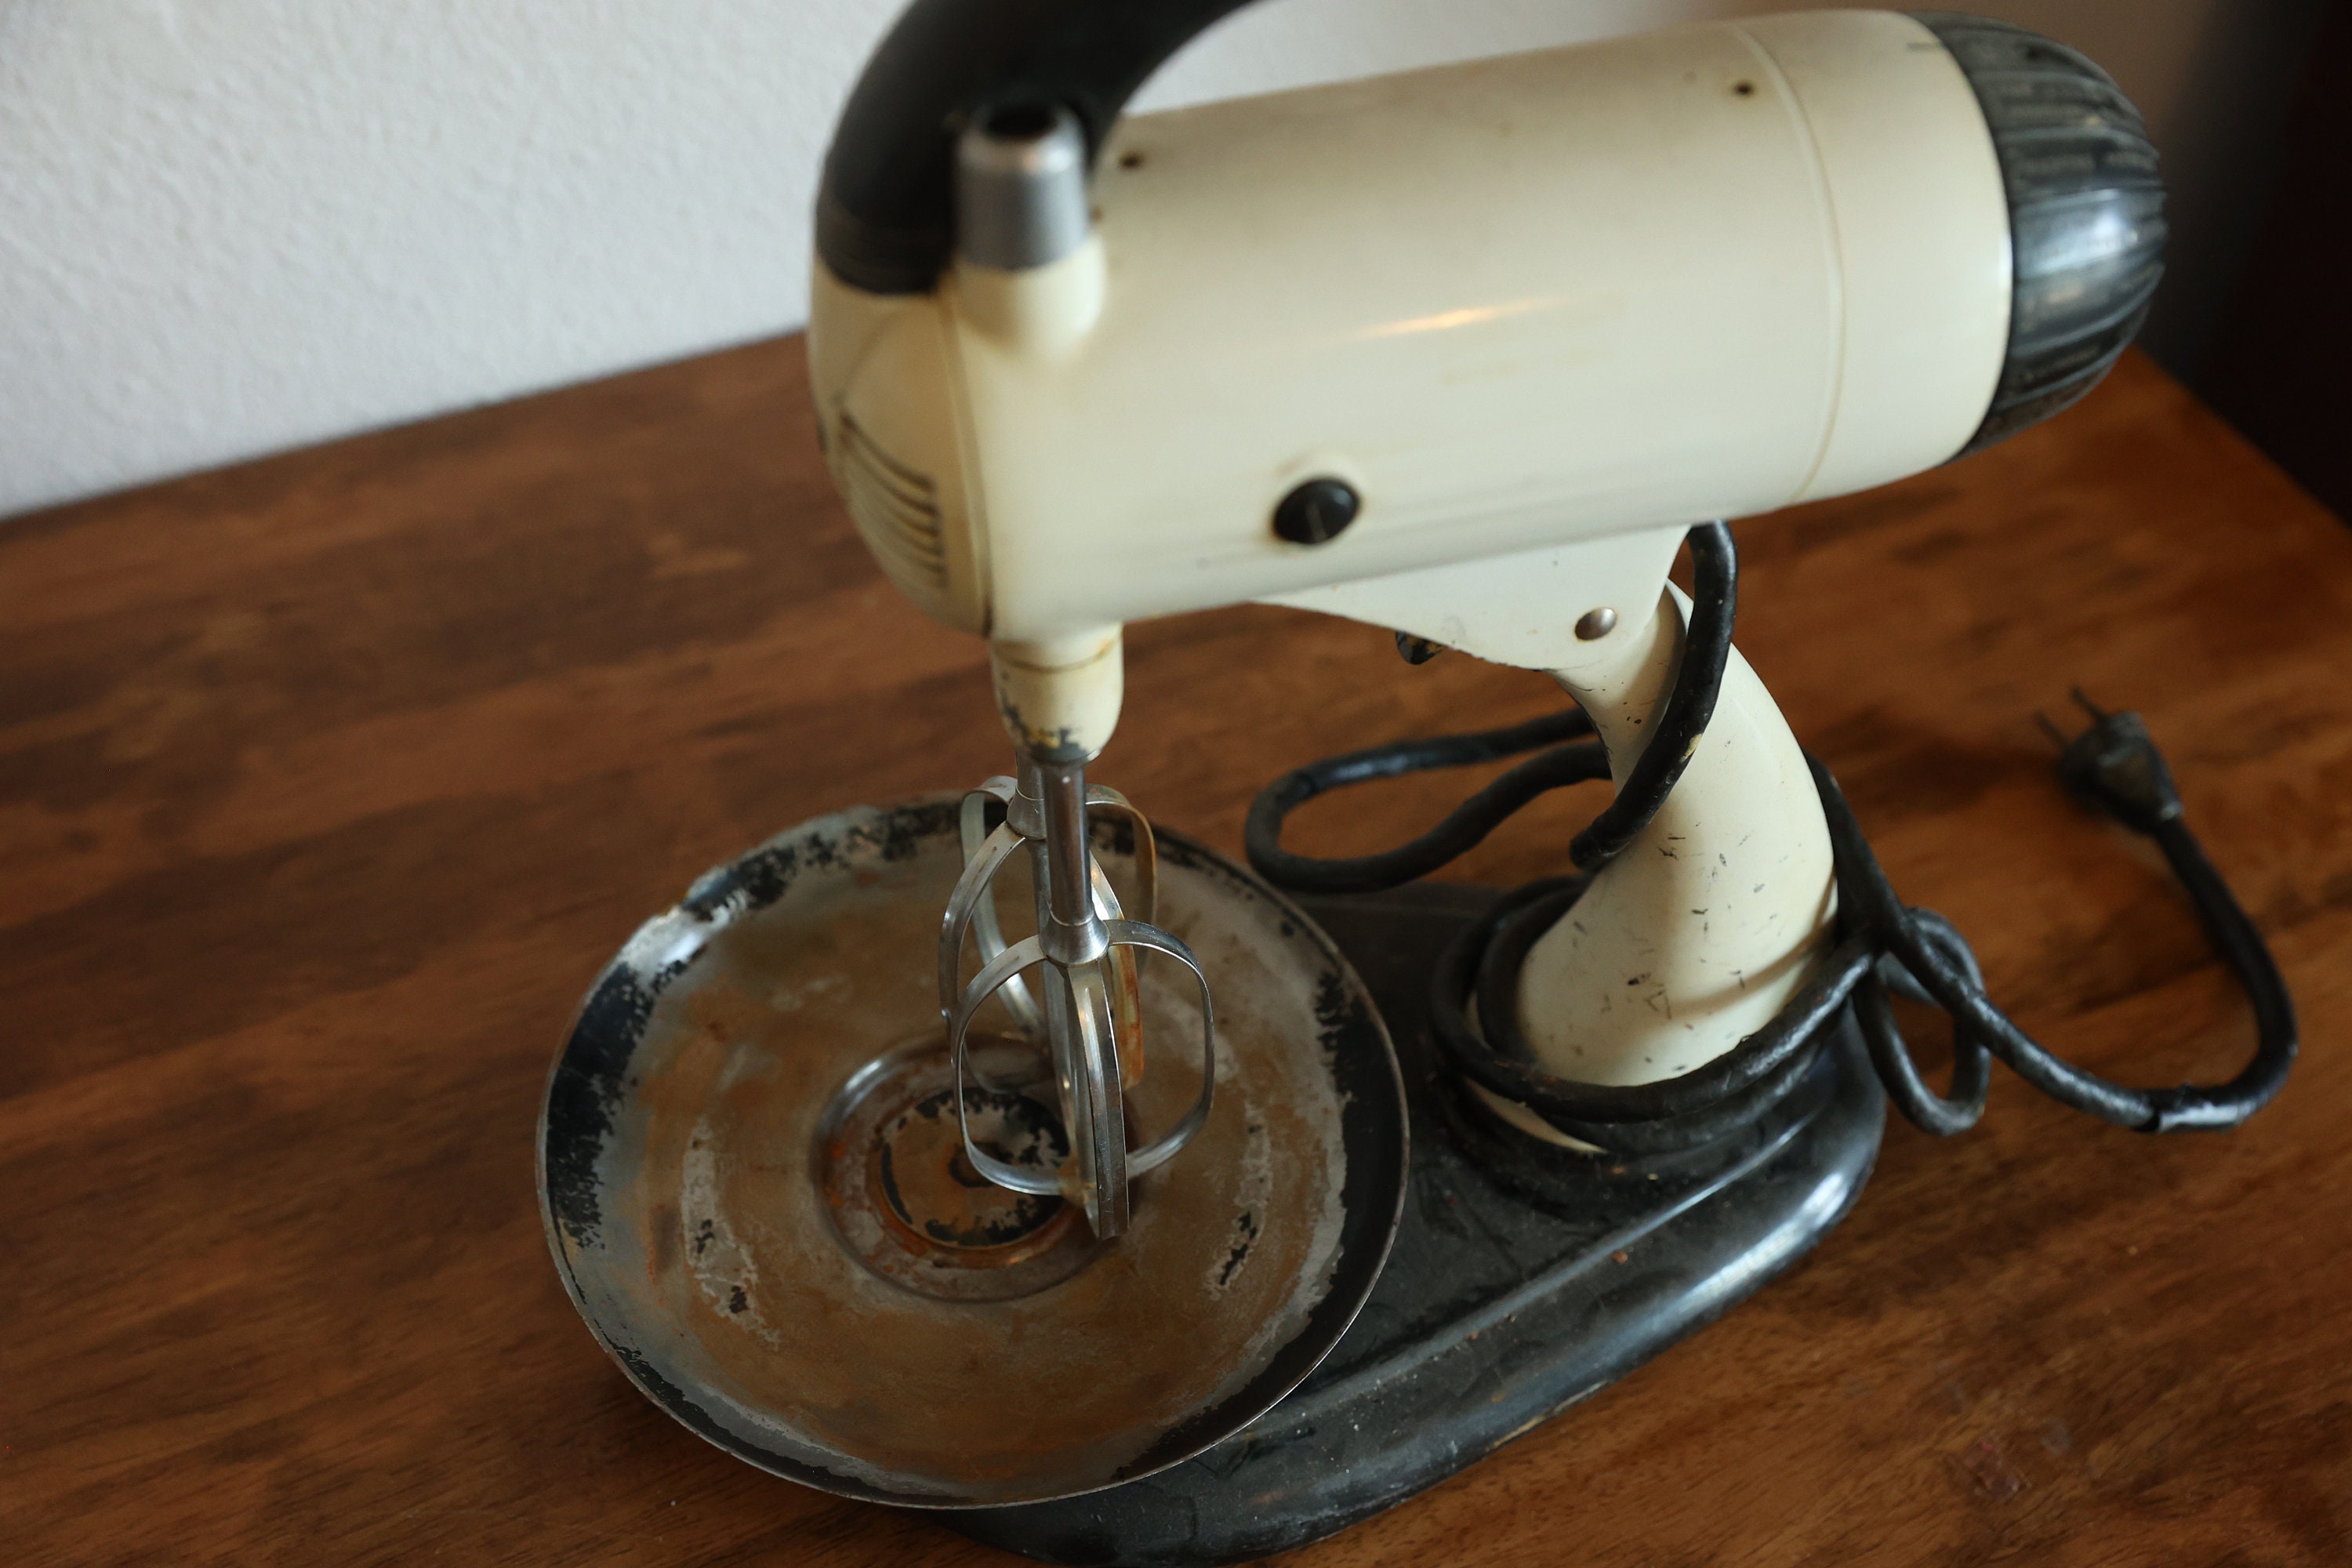 Vintage 1955 Sunbeam Mixmaster Stand Mixer - Model 11 in Working Condition